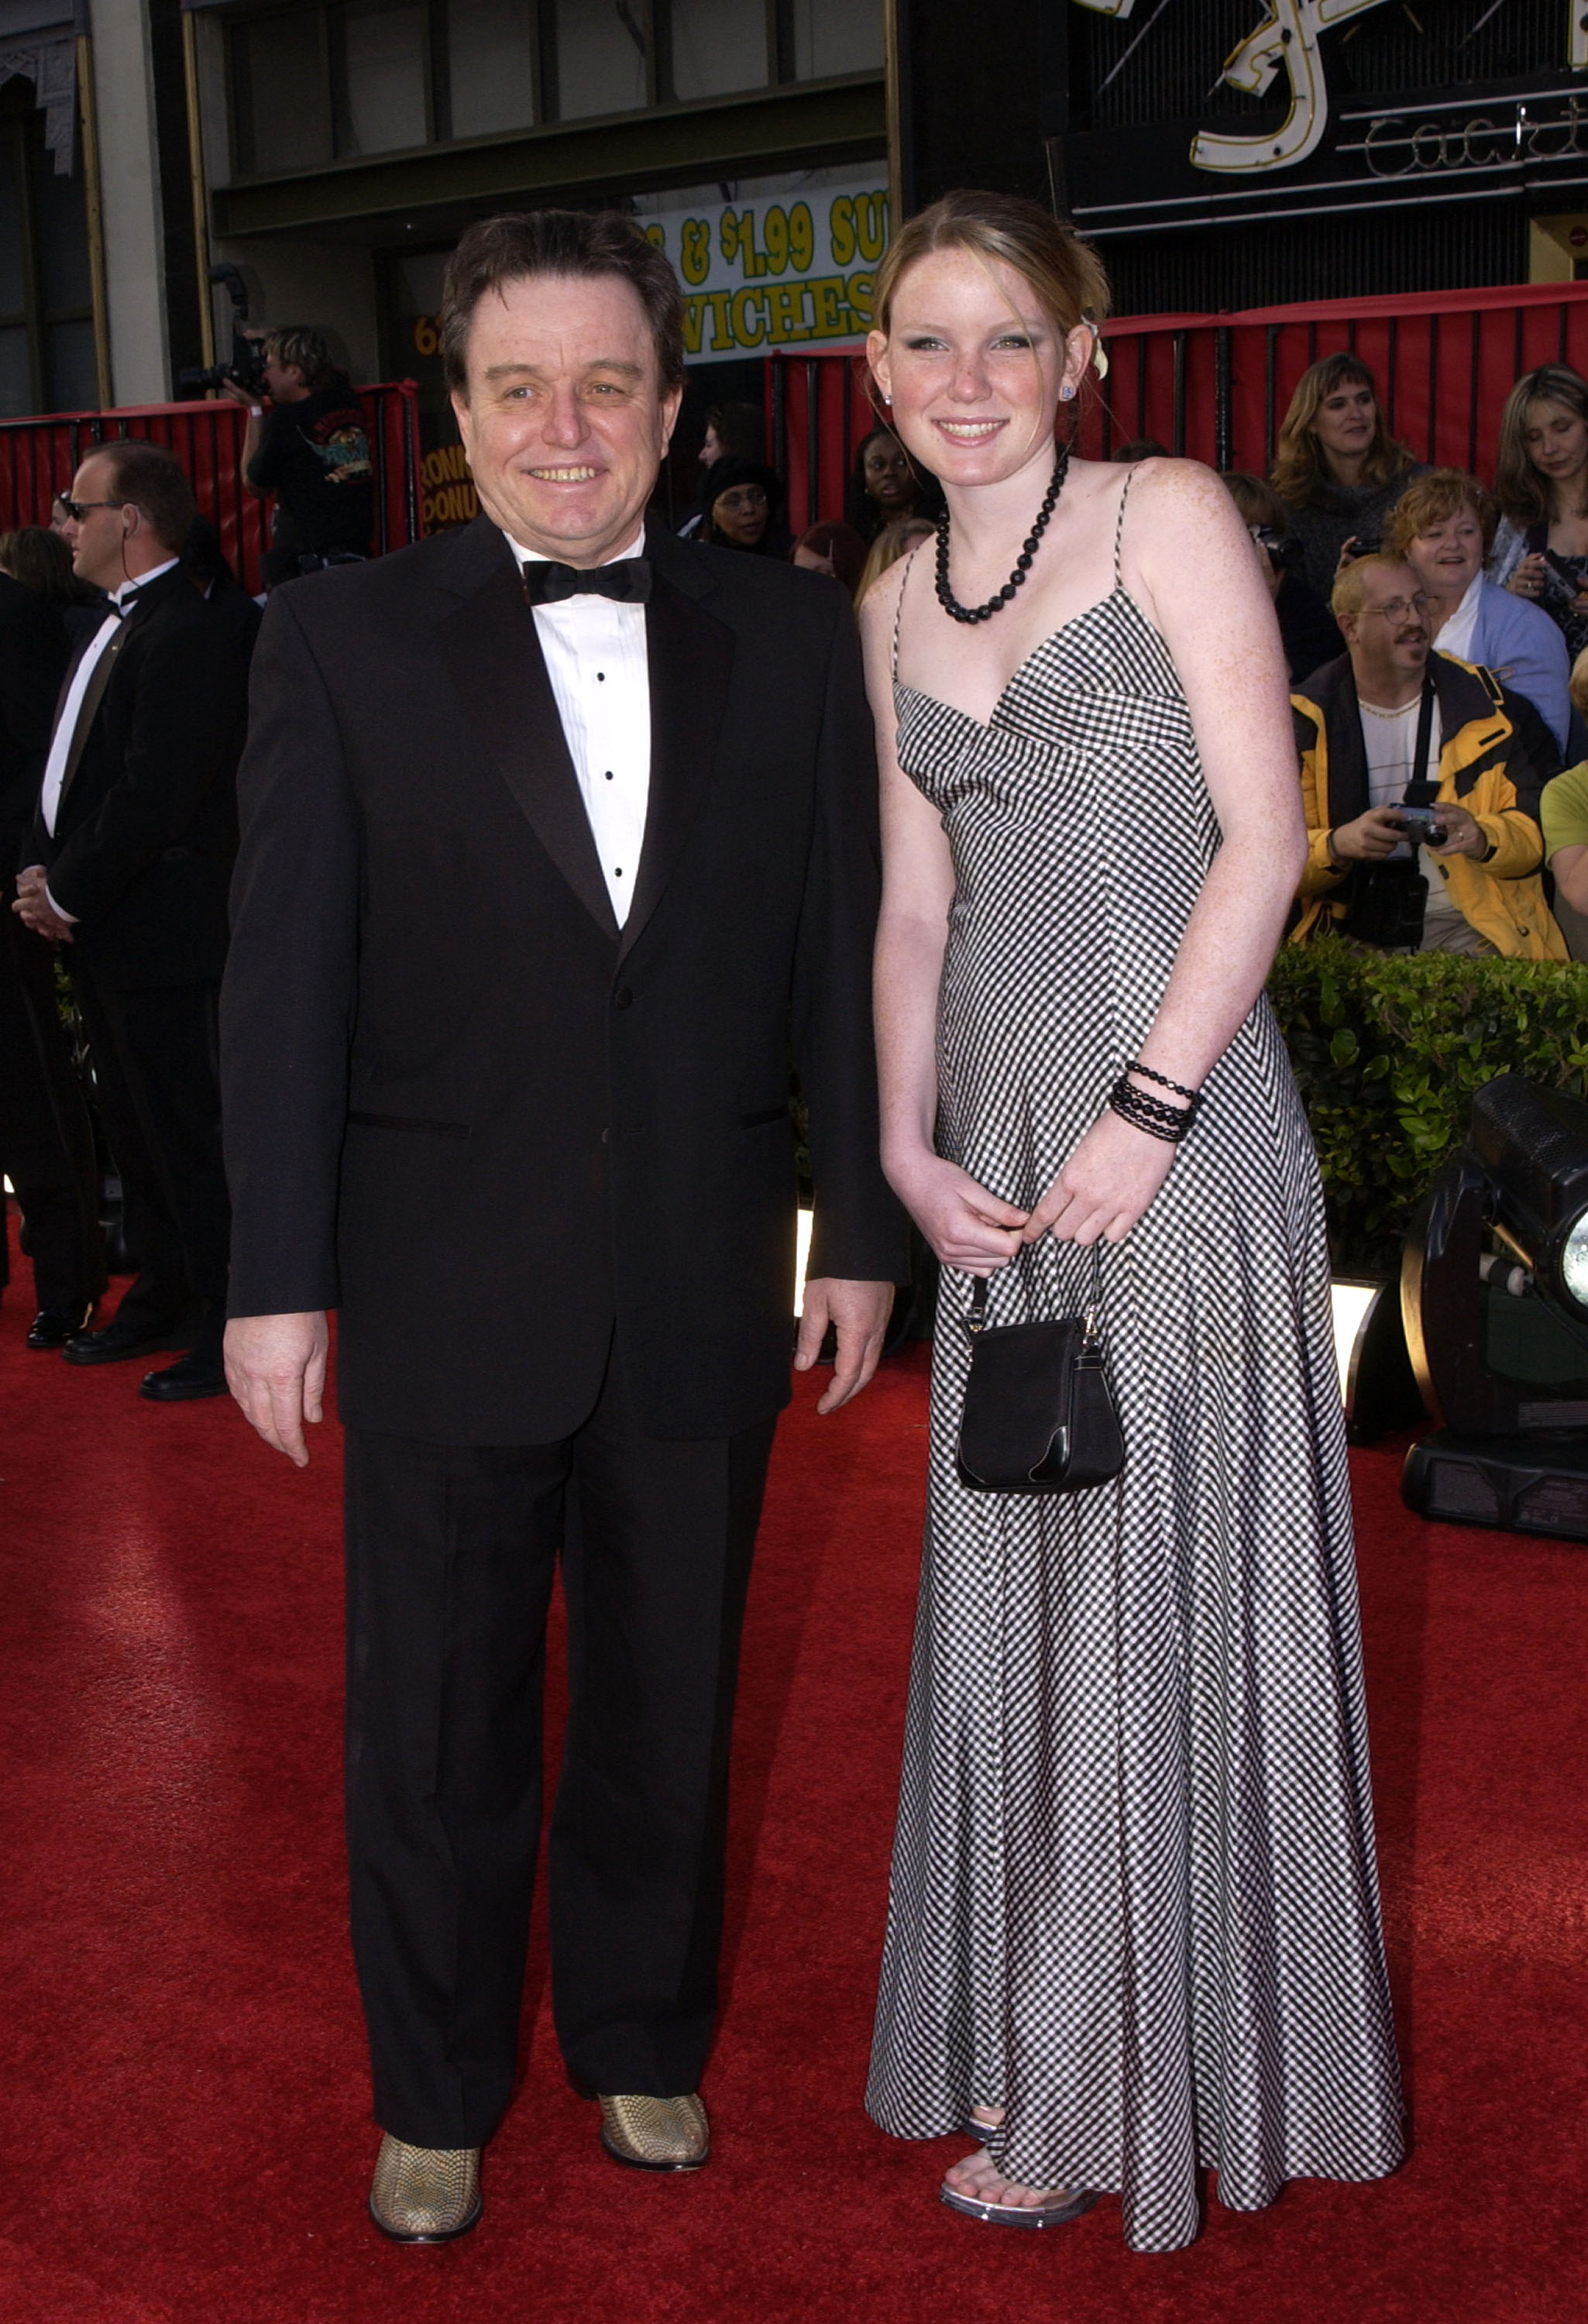 Jerry Mathers with daughter in Hollywood, California on March 6, 2003| Source: Getty Images 